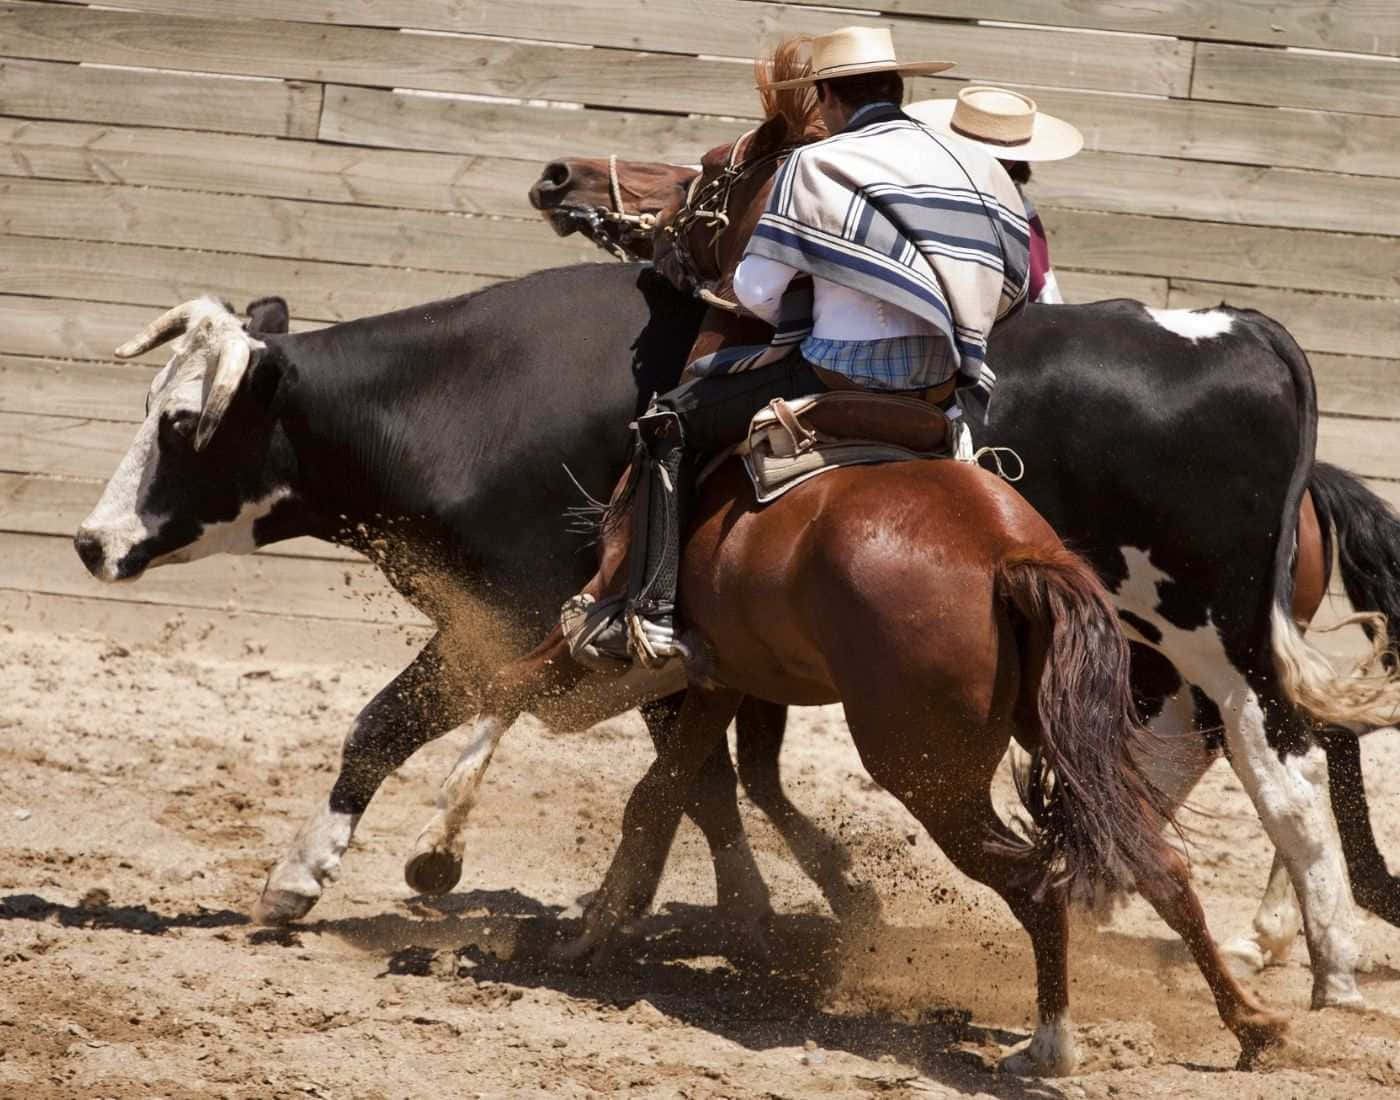 A rodeo is a competition that tests riders’ and animals’ skills through events such as bull riding, bronco riding and barrel racing.